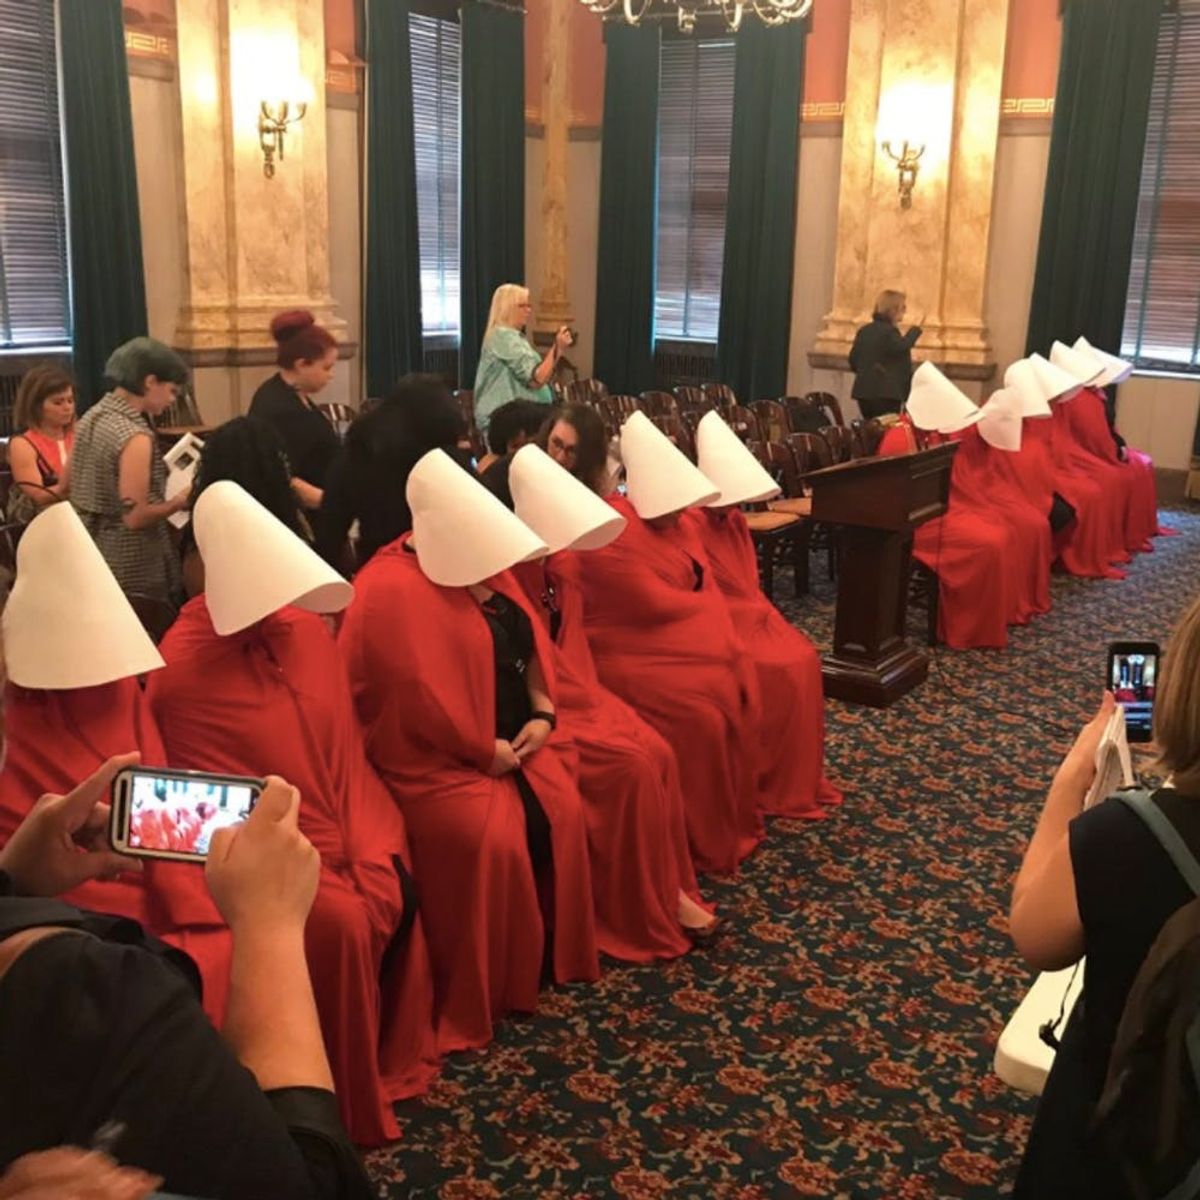 The Women Behind the Pro-Choice Handmaid Protests